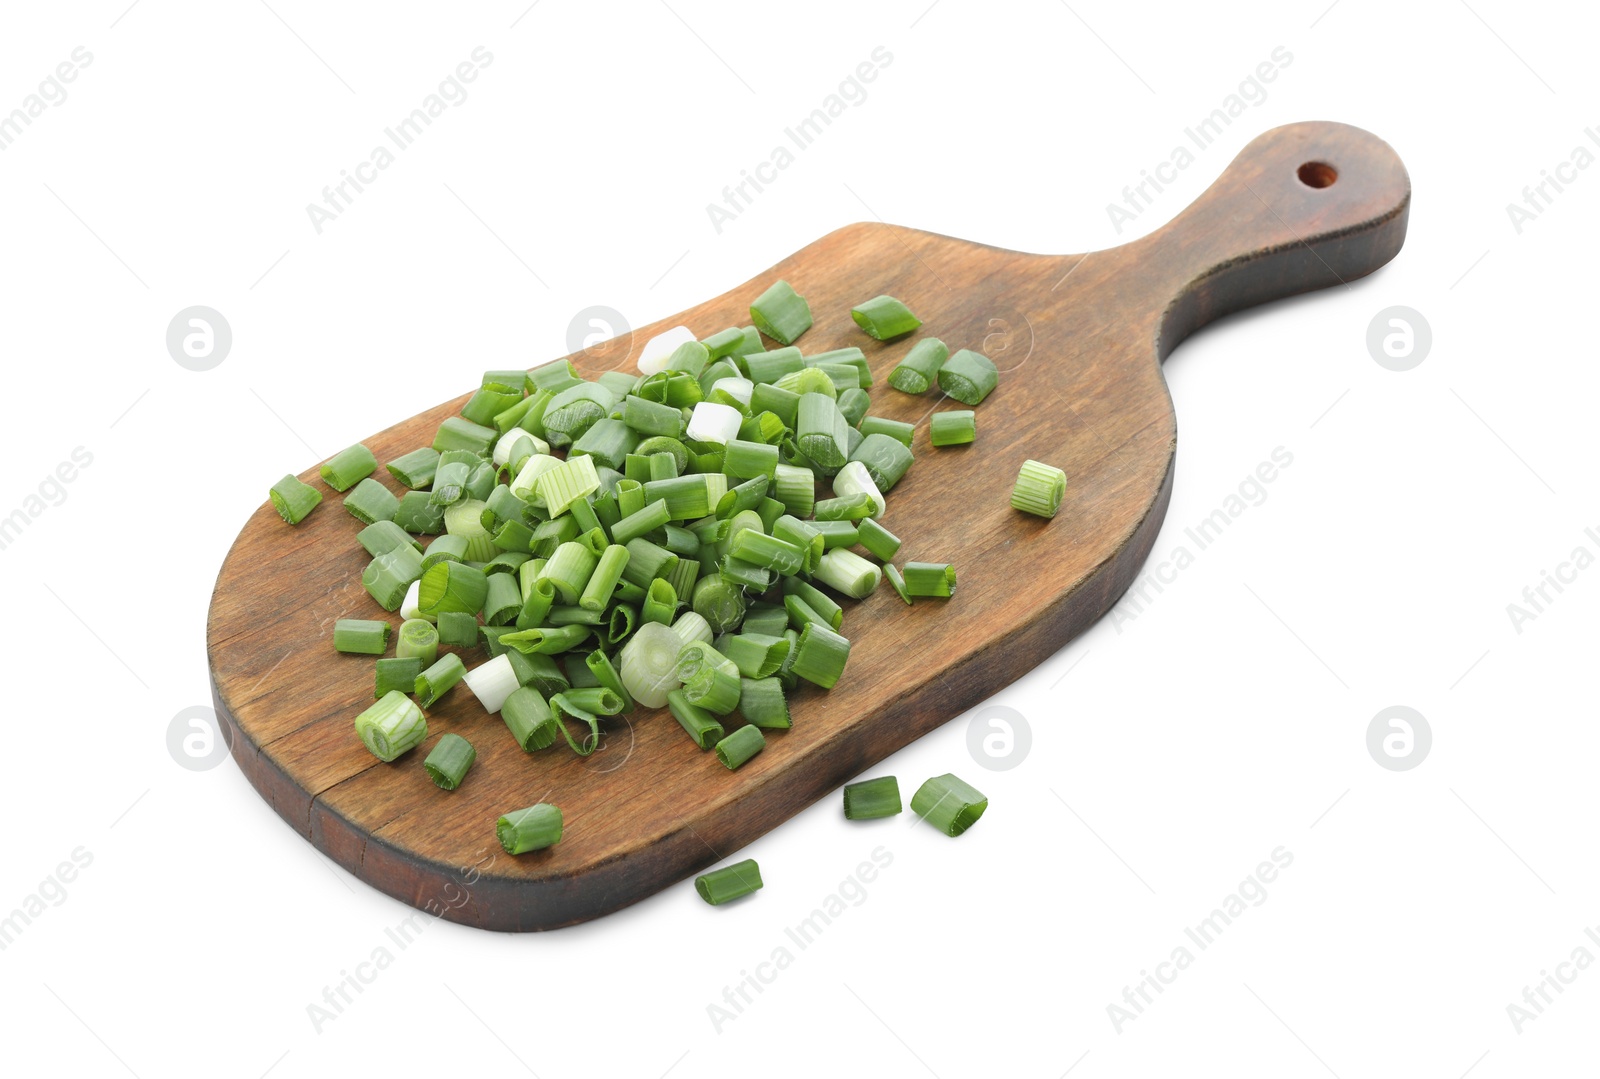 Photo of Wooden board with chopped green onion isolated on white